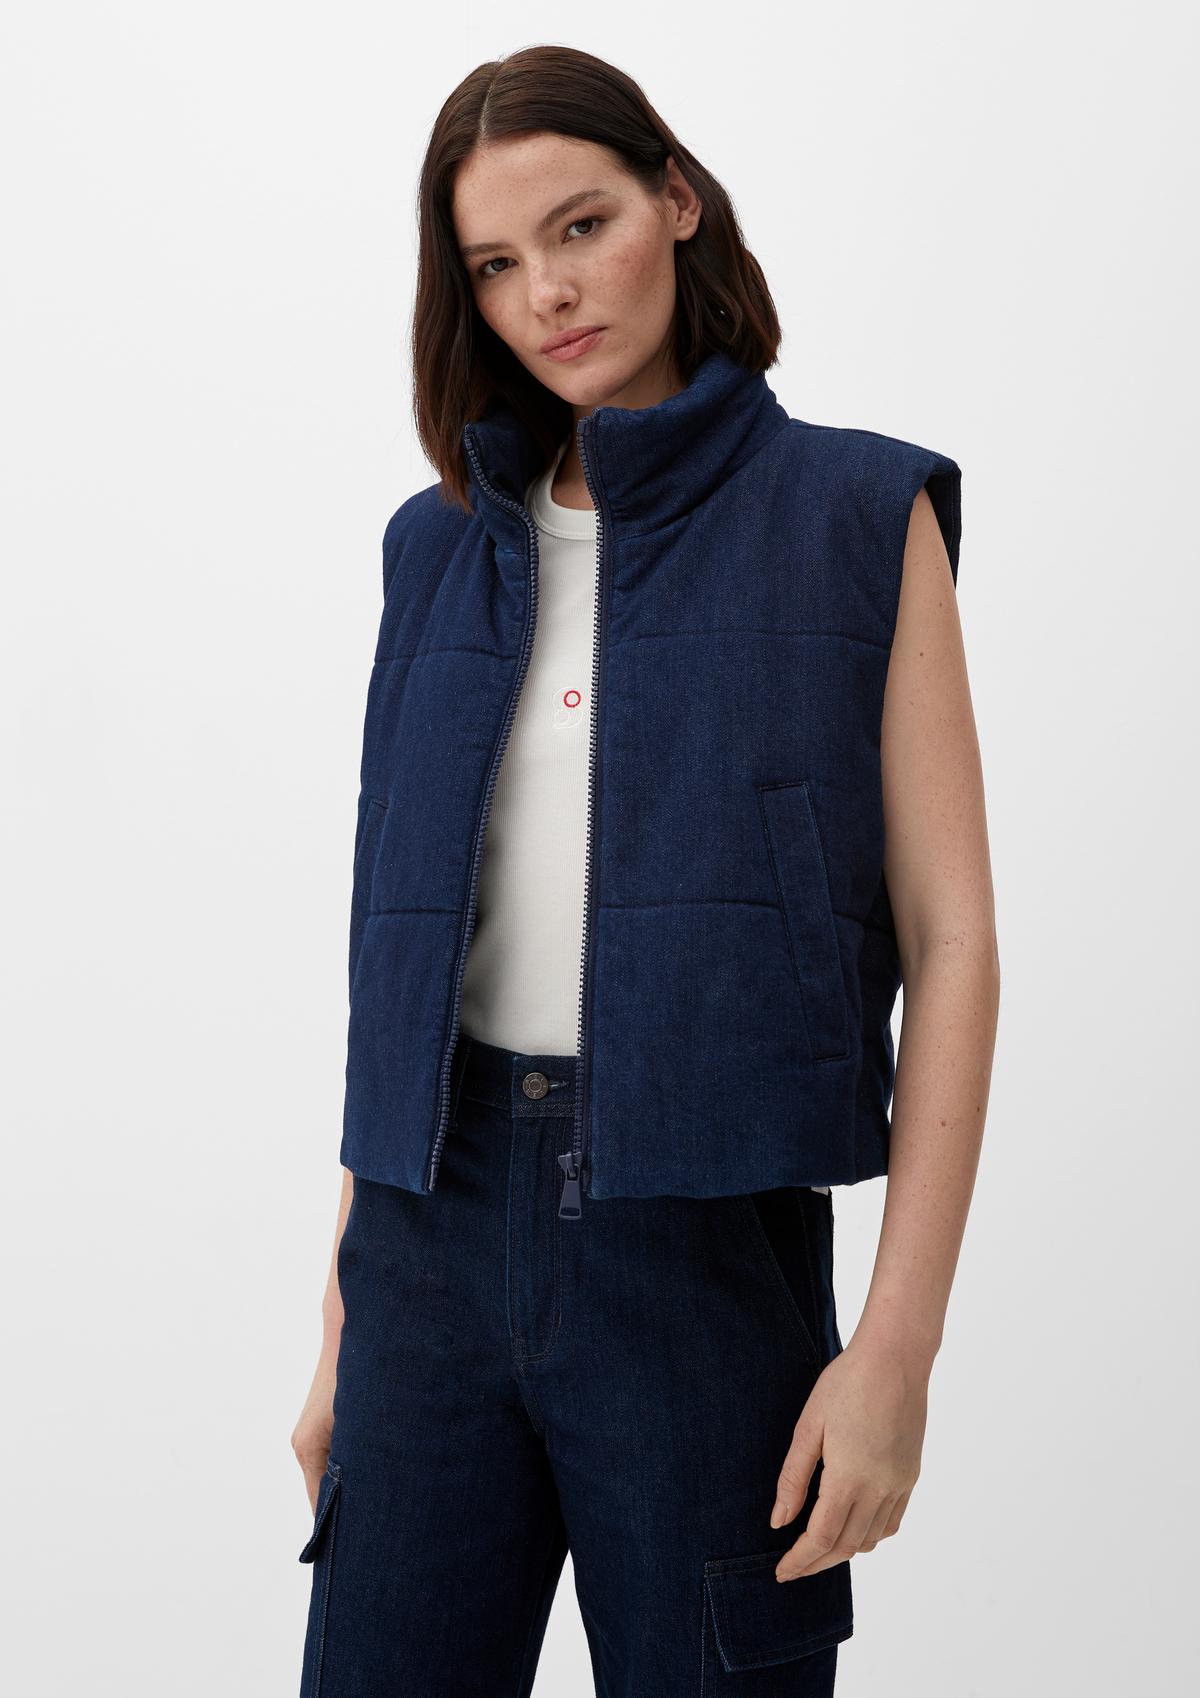 Denim waistcoat with a stand-up collar